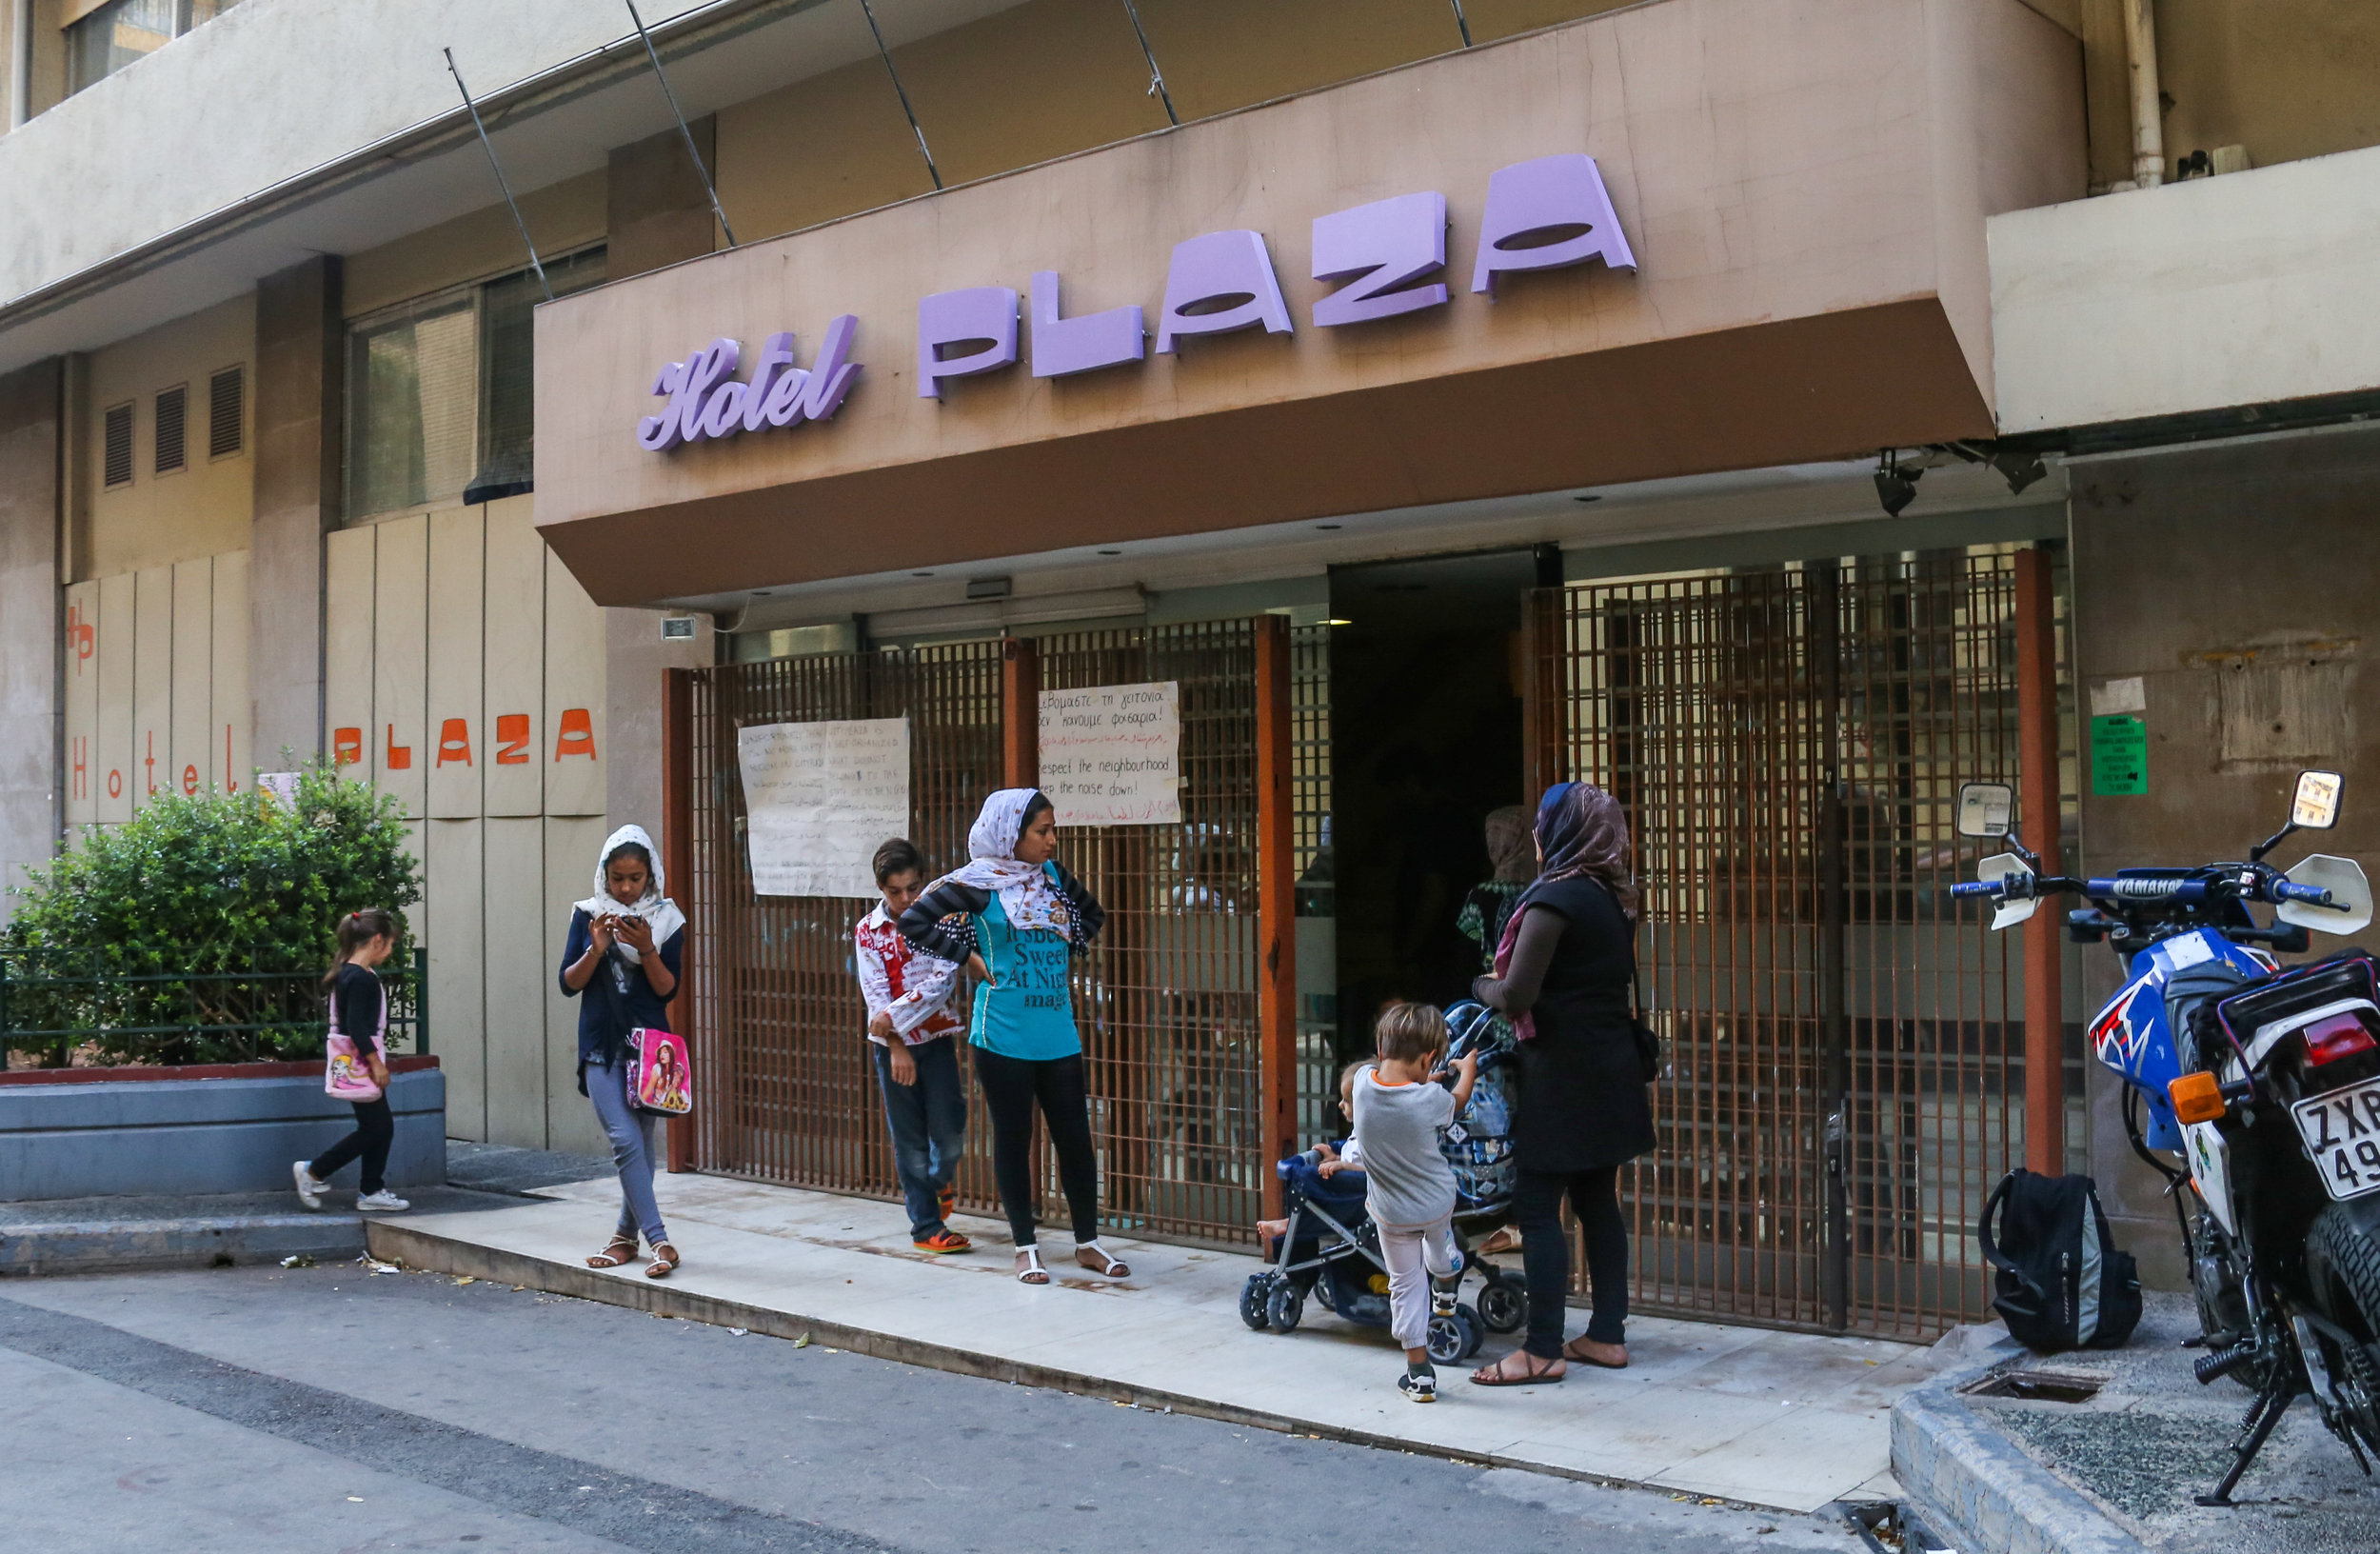  09/24/16 - 2:00pm: Mothers and their children stand outside while the lobby of City Plaza Refugee squat is cleaned. The abandoned 7-story hotel now houses 400 migrants (180 of those children). 